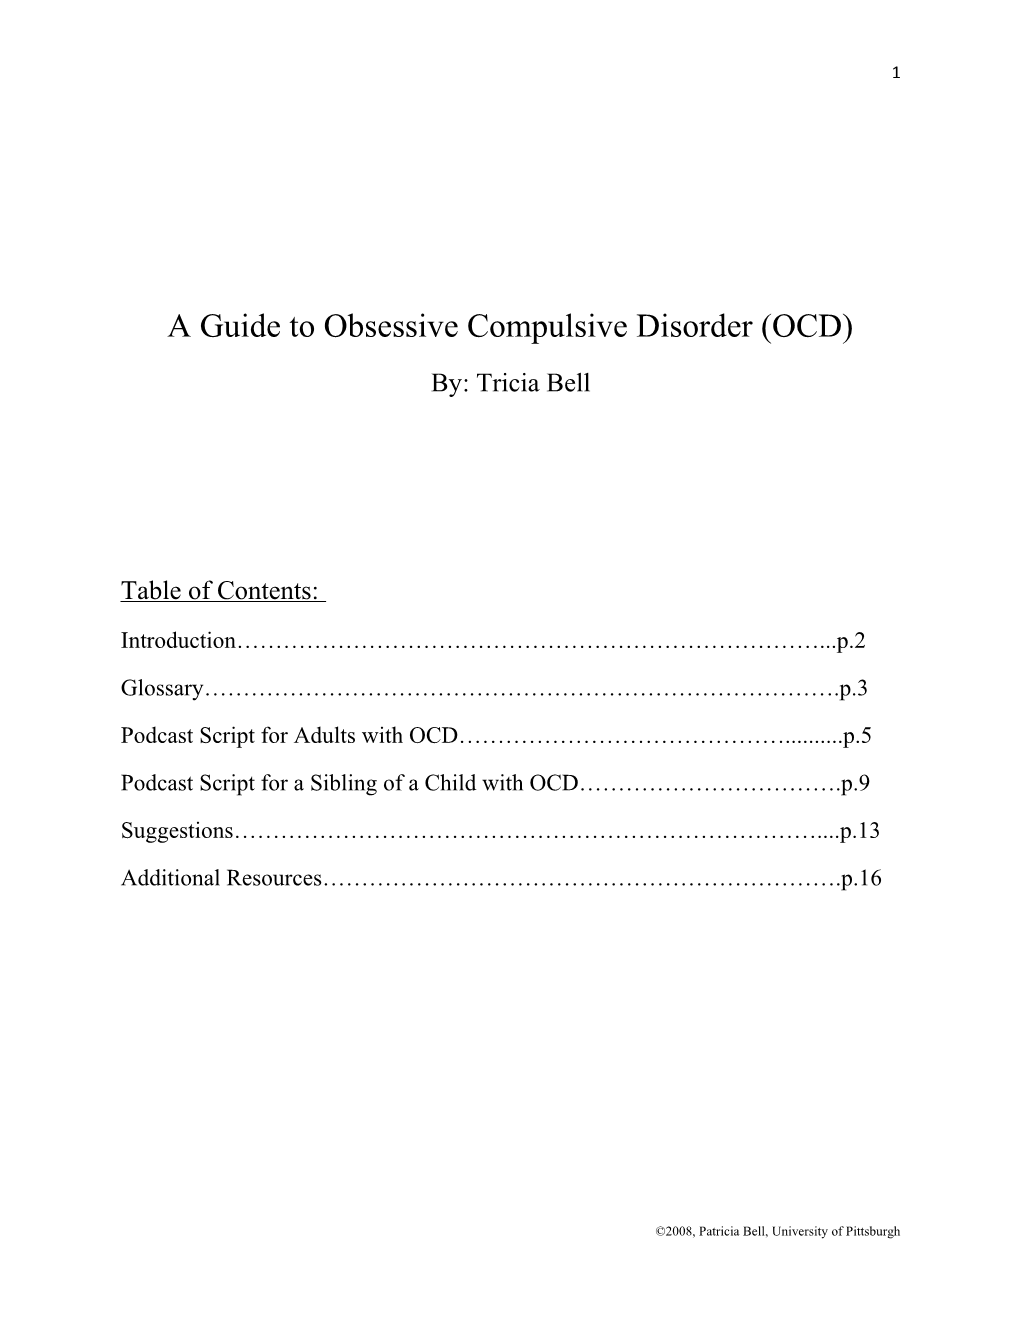 A Guide to Obsessive Compulsive Disorder (OCD)